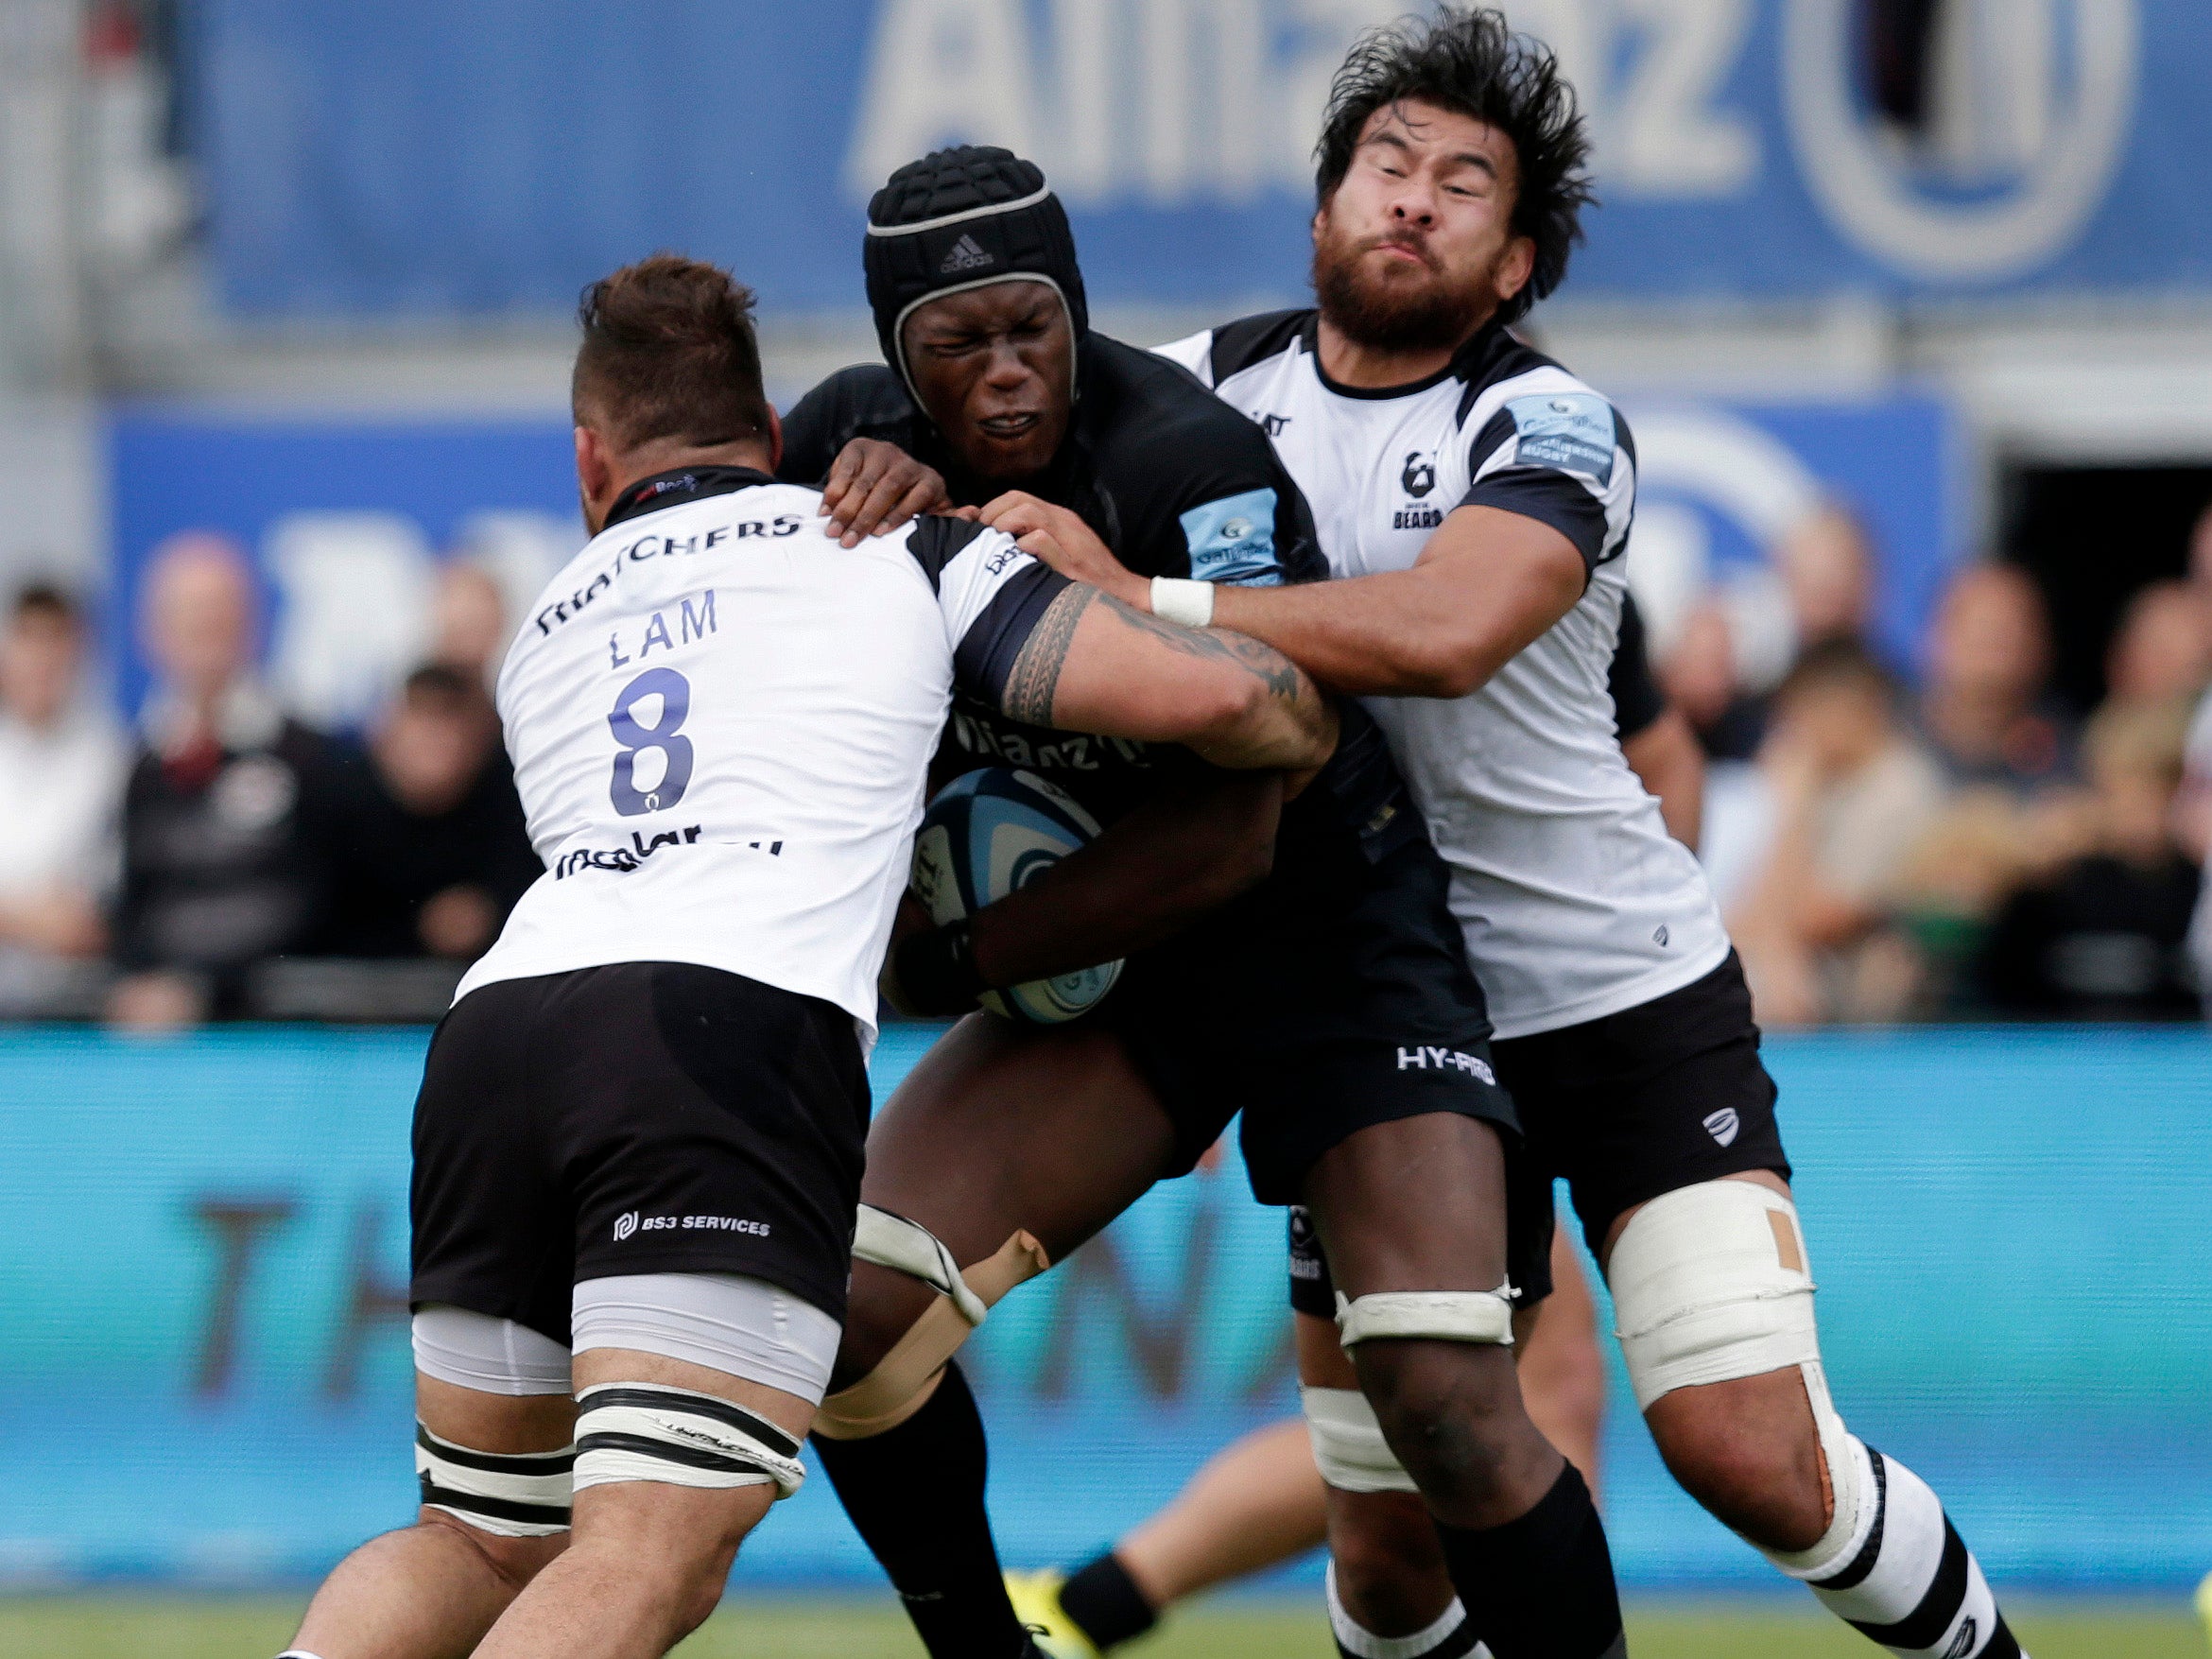 Itoje was heavily criticised last week